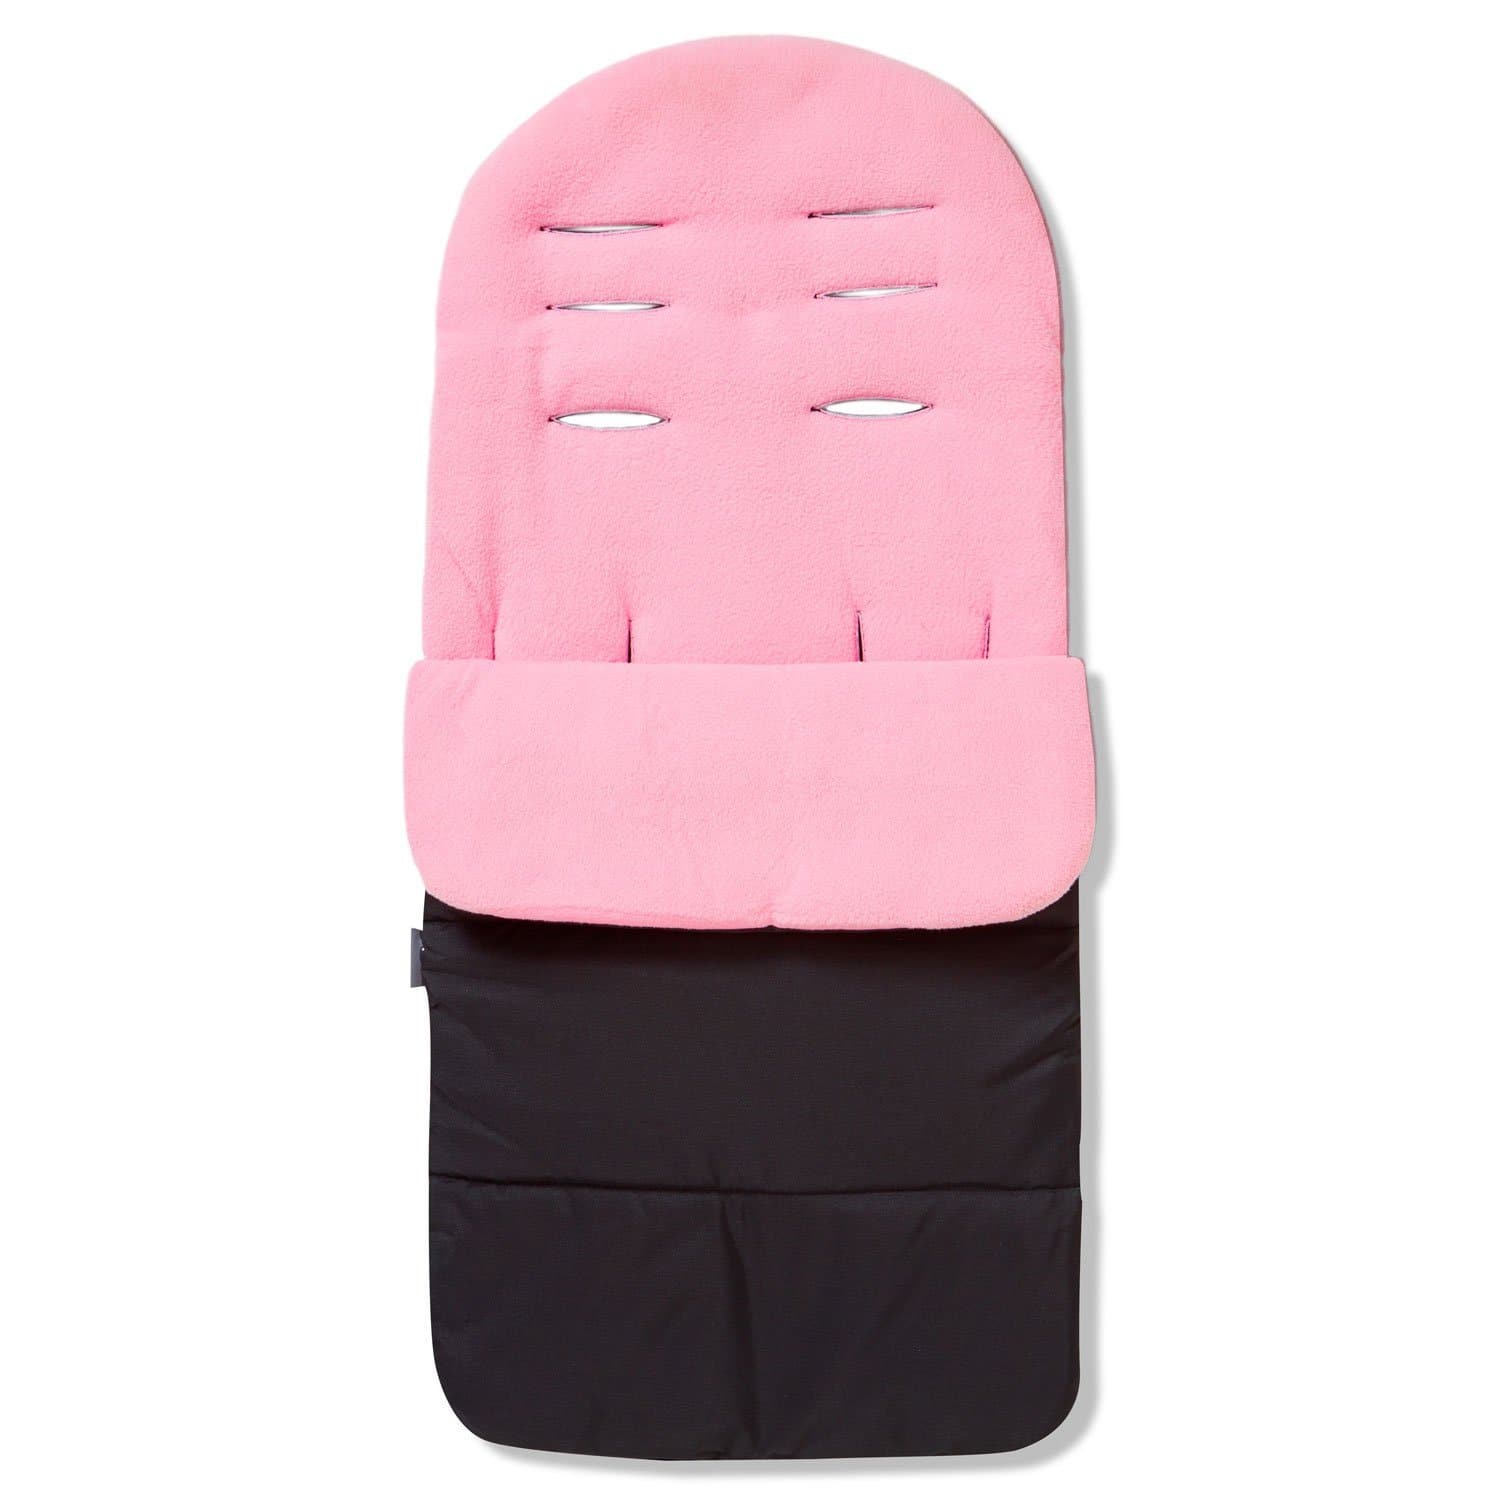 Premium Footmuff / Cosy Toes Compatible with Babybus - Candy Pink / Fits All Models | For Your Little One